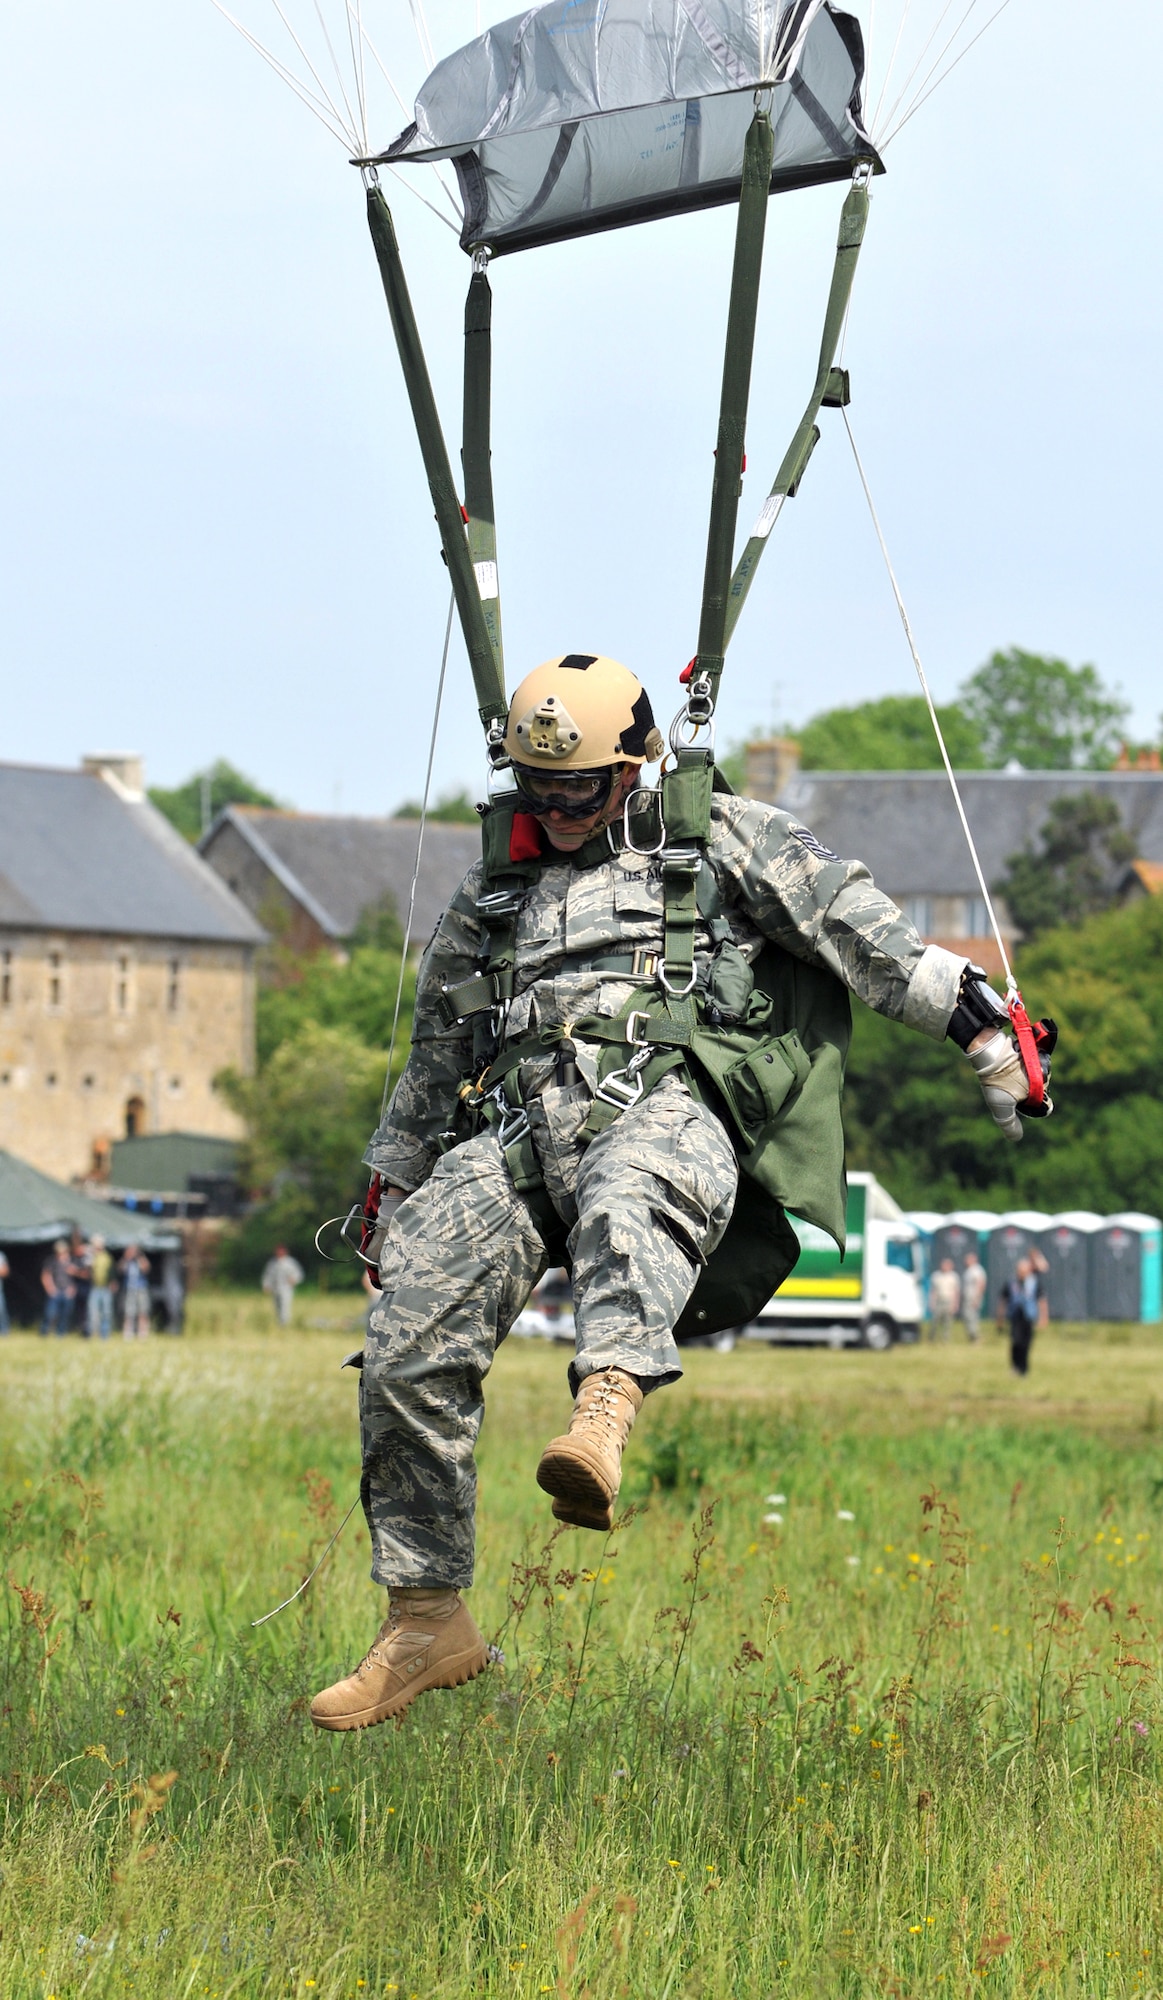 A member of the 321st Special Tactics Squadron lands June 5, 2010, in the "Iron Mike" drop zone in Normandy, France, where the Allies first landed in the D-Day invasion of World War II. The high-altitude, low-opening jump was part of a ceremony commemorating the 66th anniversary of D-Day. The 321st STS is from RAF Mildenhall, England. (U.S. Air Force photo/Staff Sgt. Austin M. May)